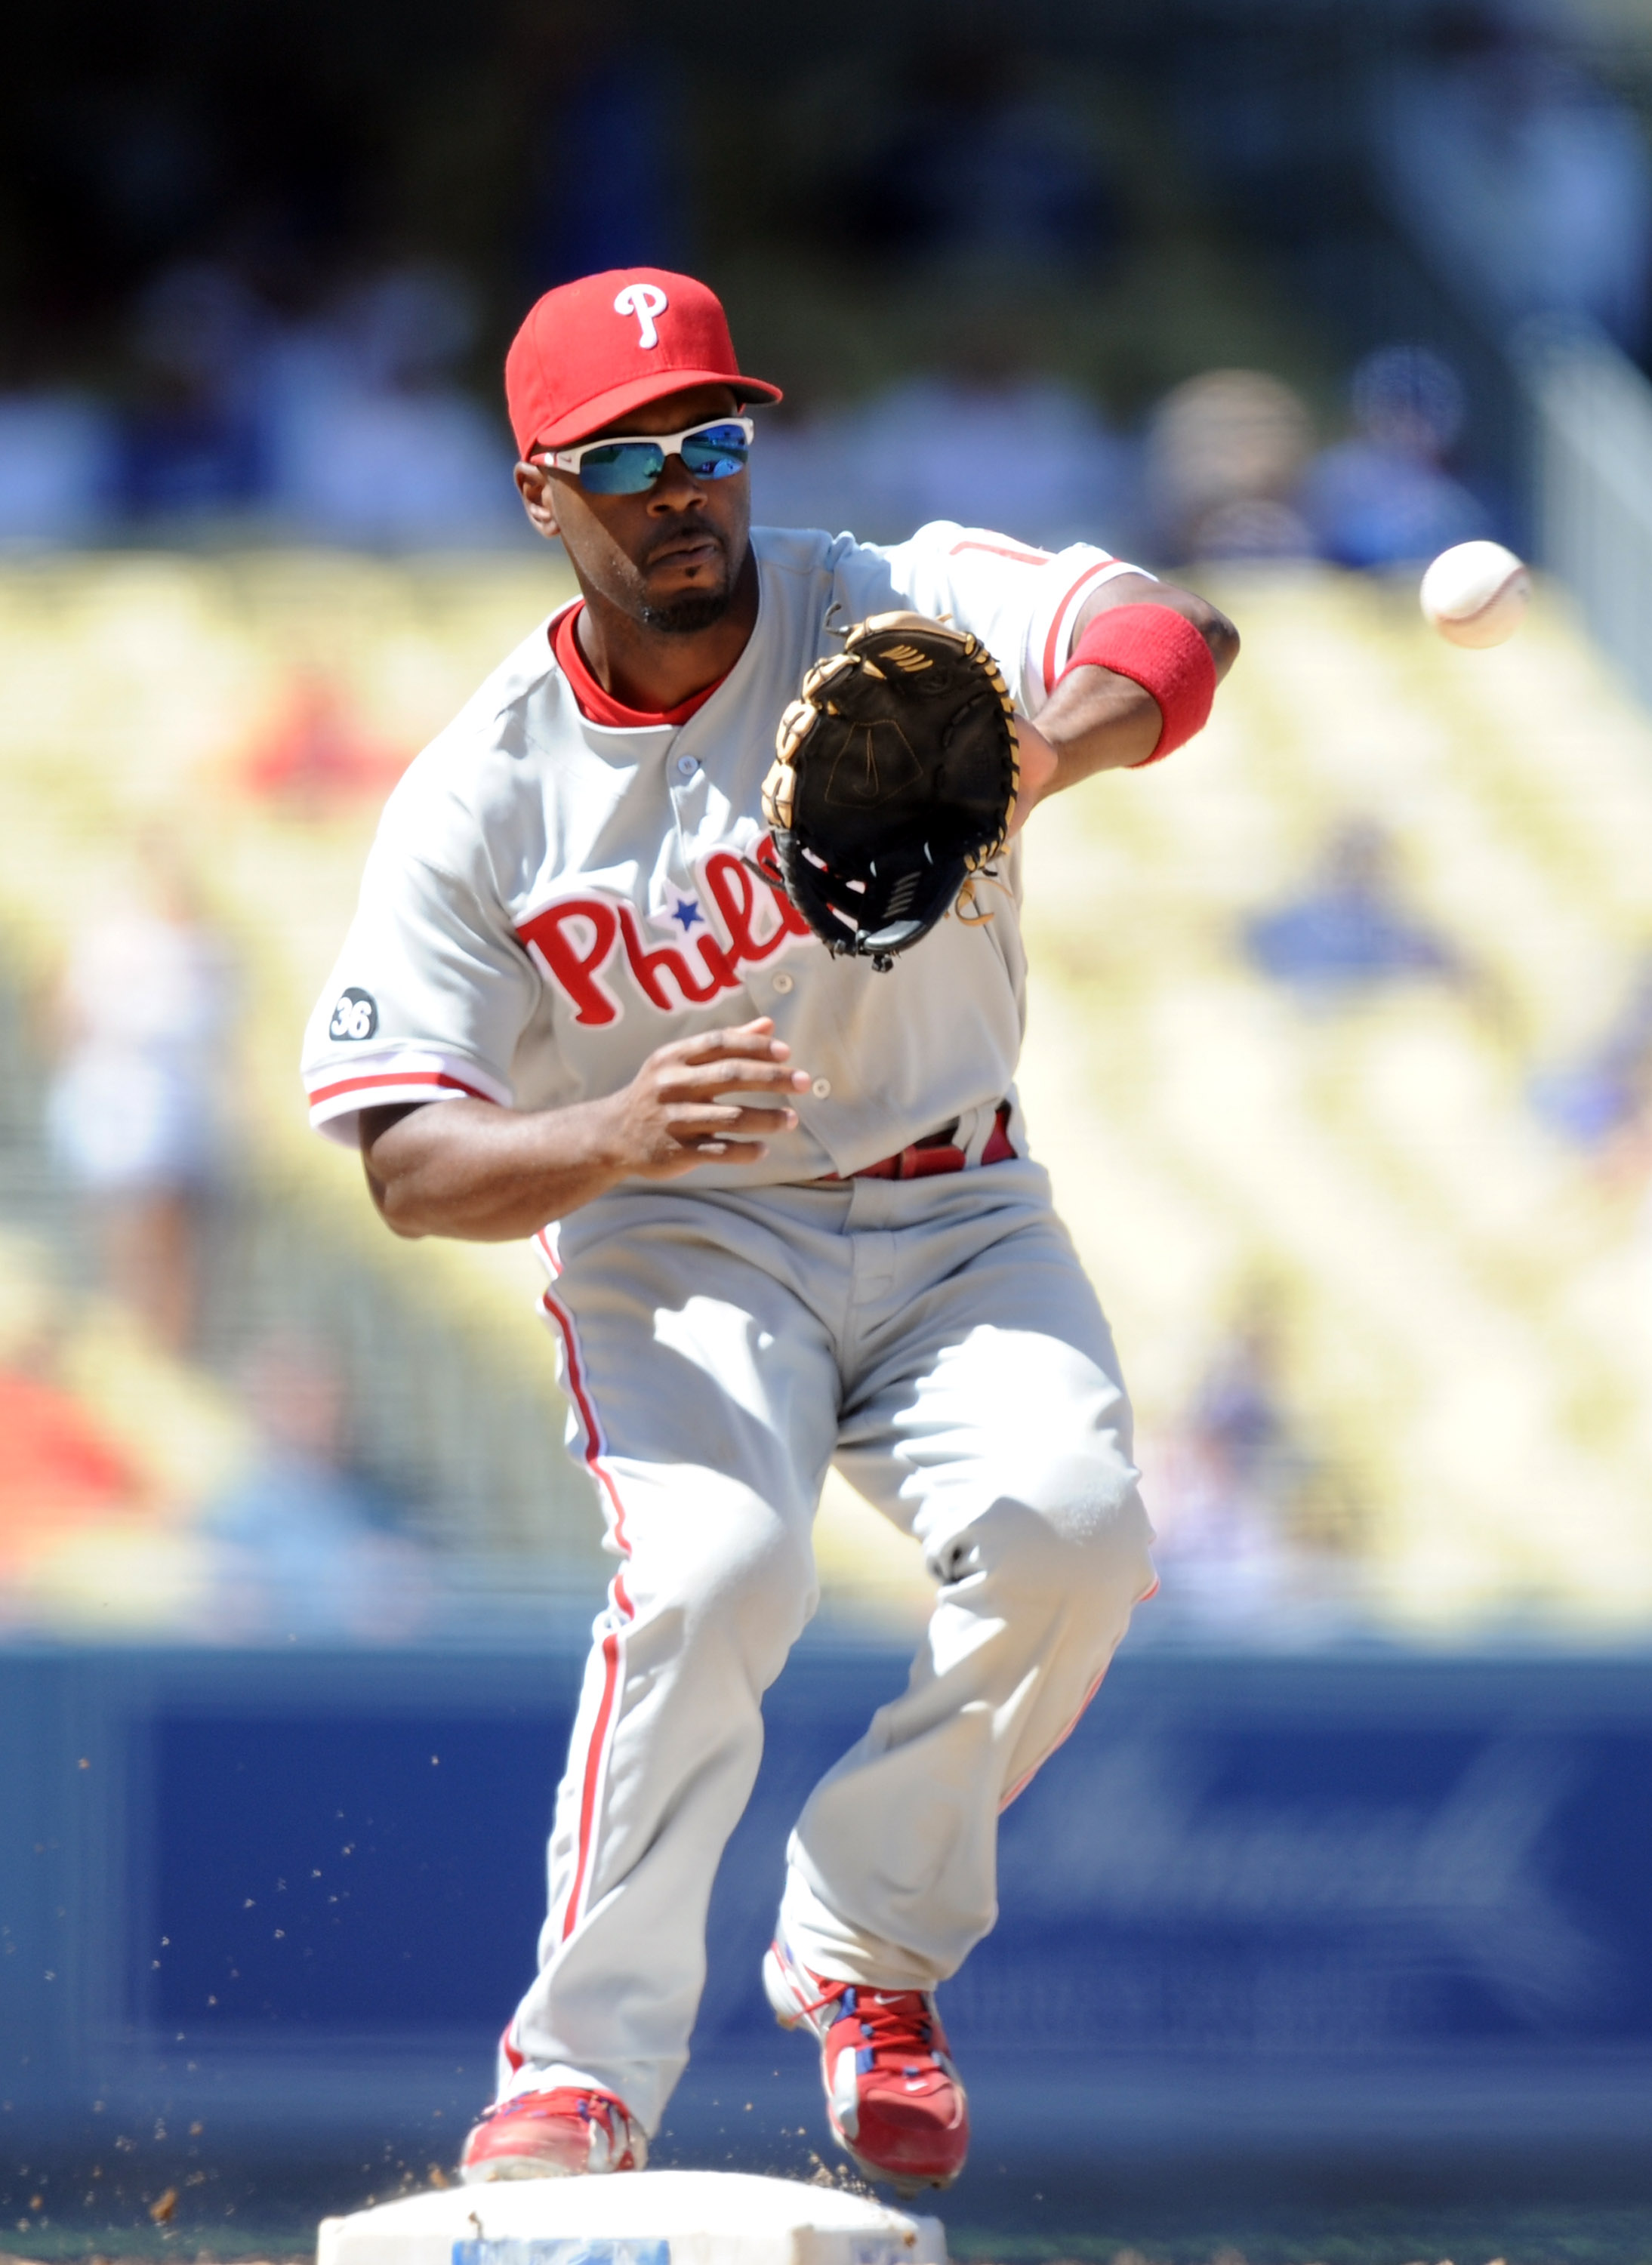 LOS ANGELES, CA - SEPTEMBER 01:  Jimmy Rollins #11 of the Philadelphia Phillies catches a throw to second base against the Los Angeles Dodgers at Dodger Stadium on September 1, 2010 in Los Angeles, California.  (Photo by Harry How/Getty Images)